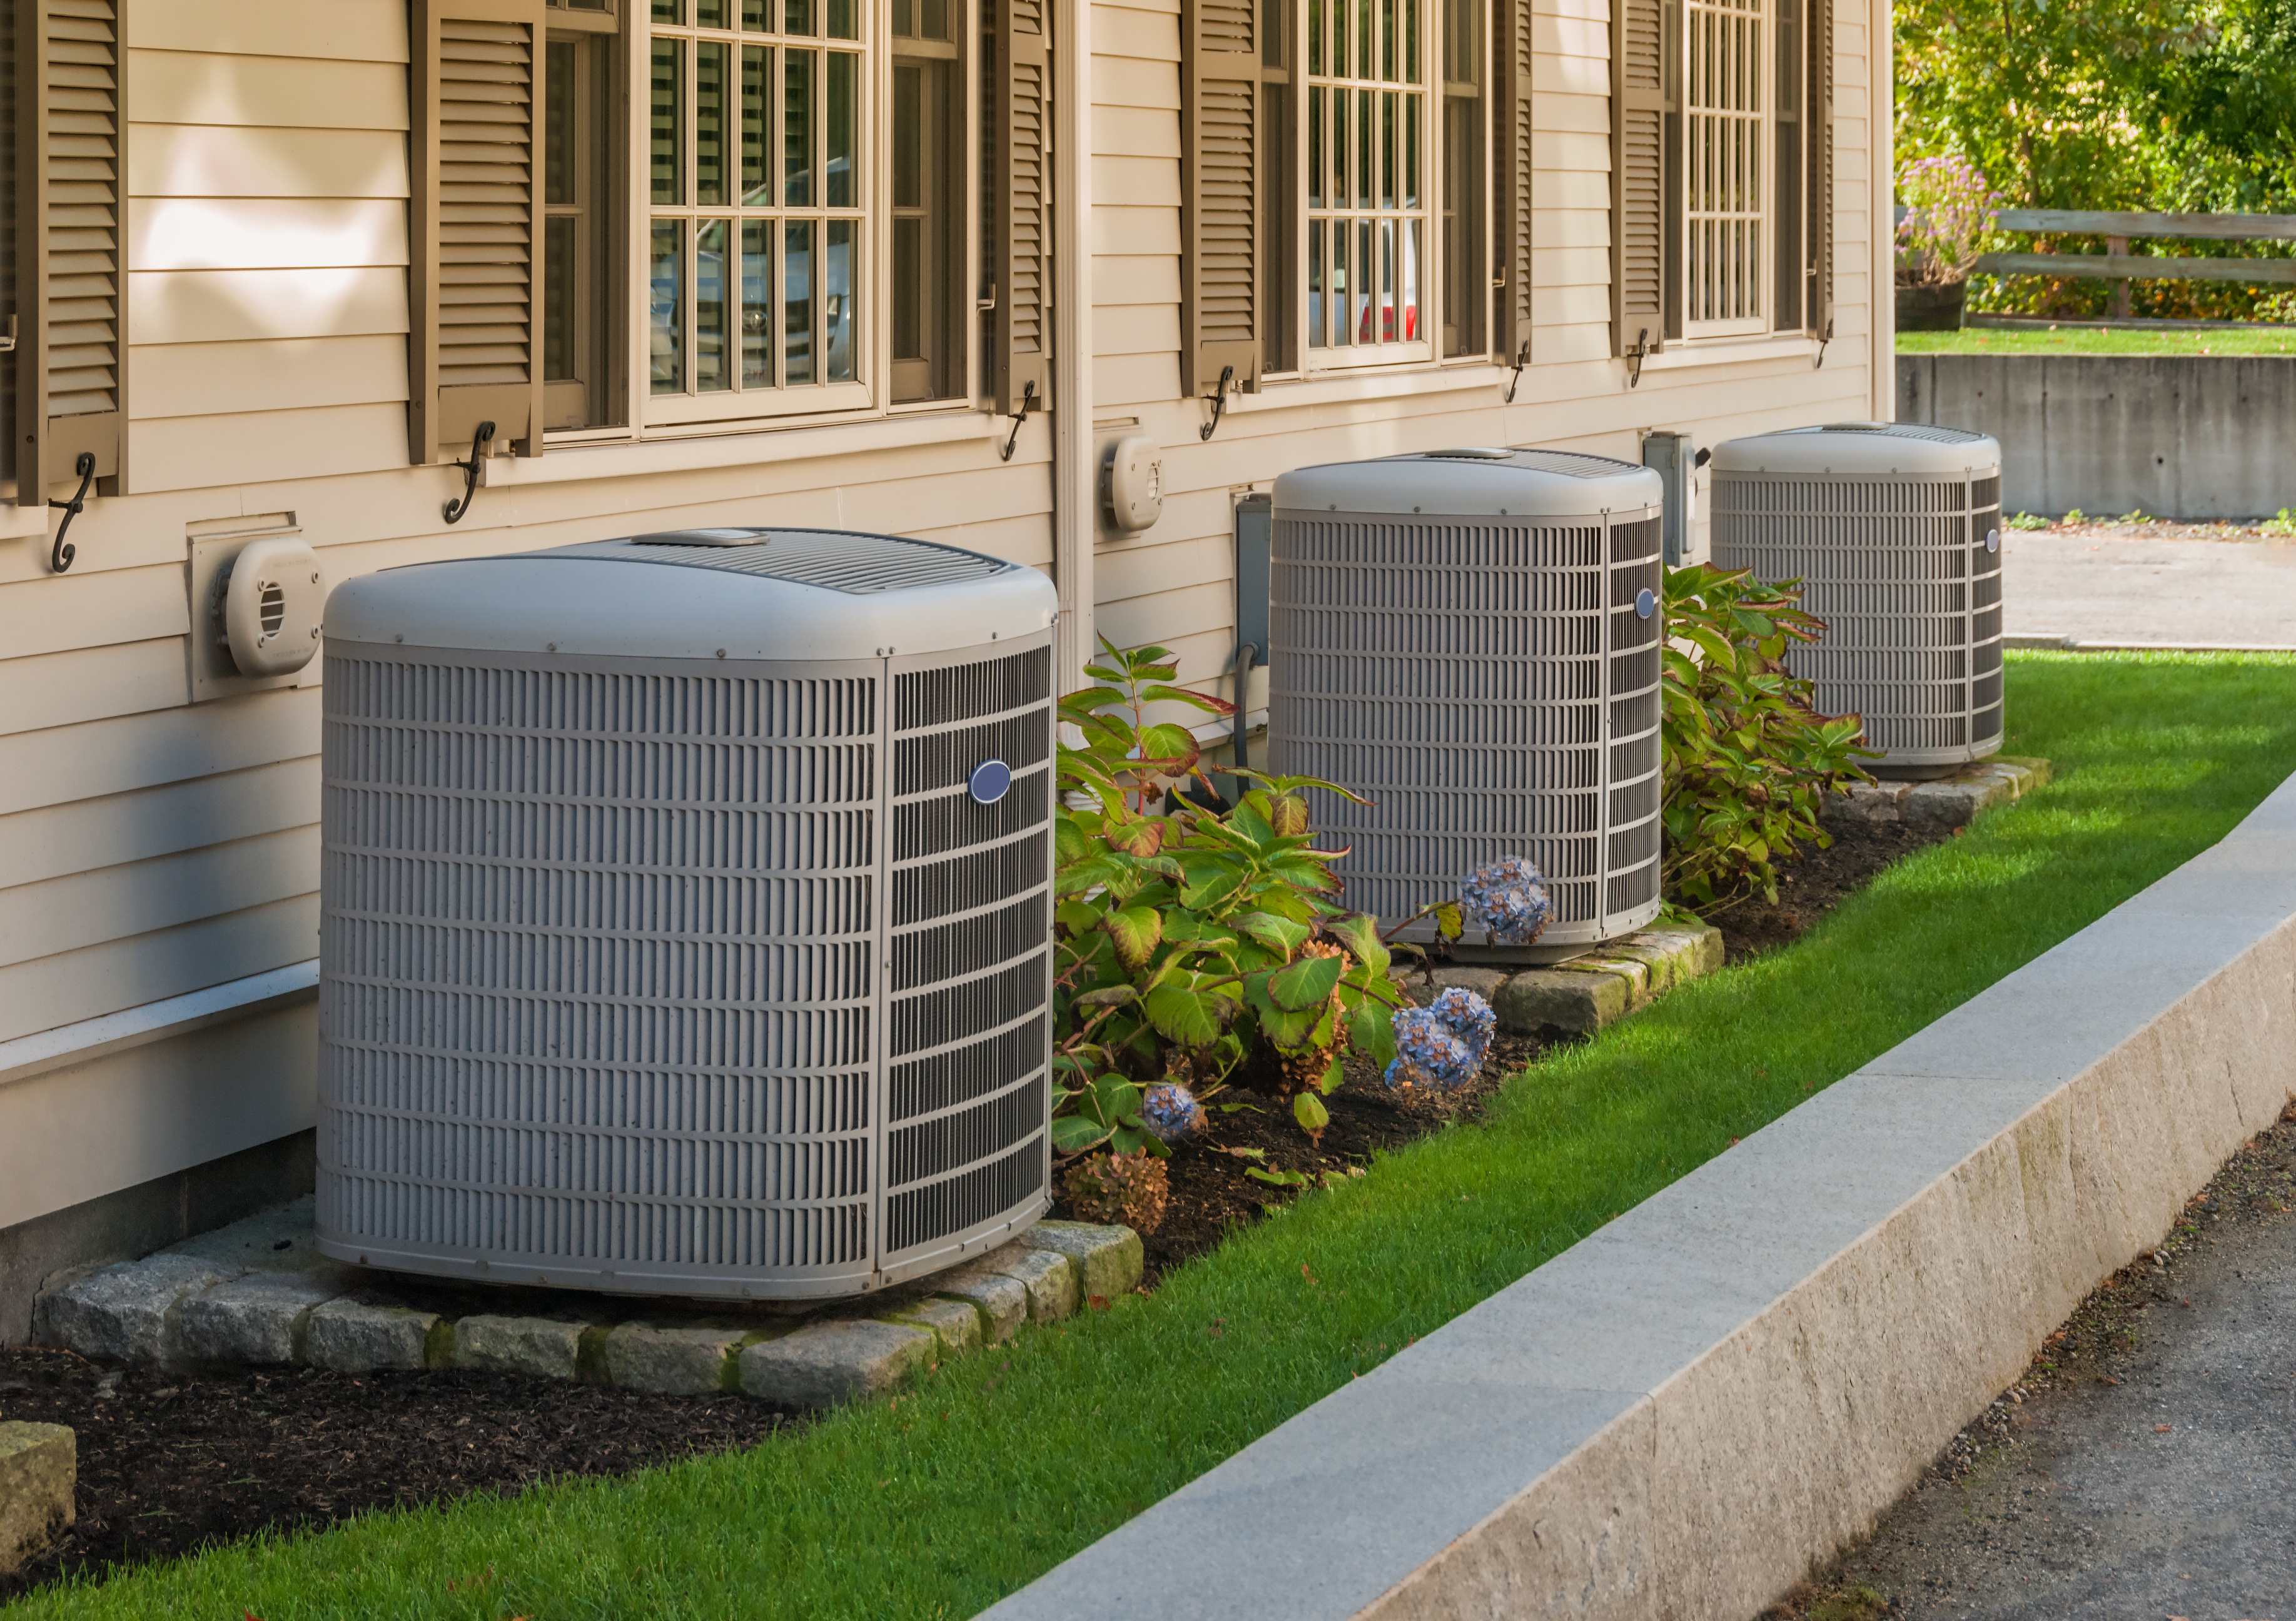 Air conditioning inverters are pictured on the side of a condo. Shutterstock image via Christian Delbert